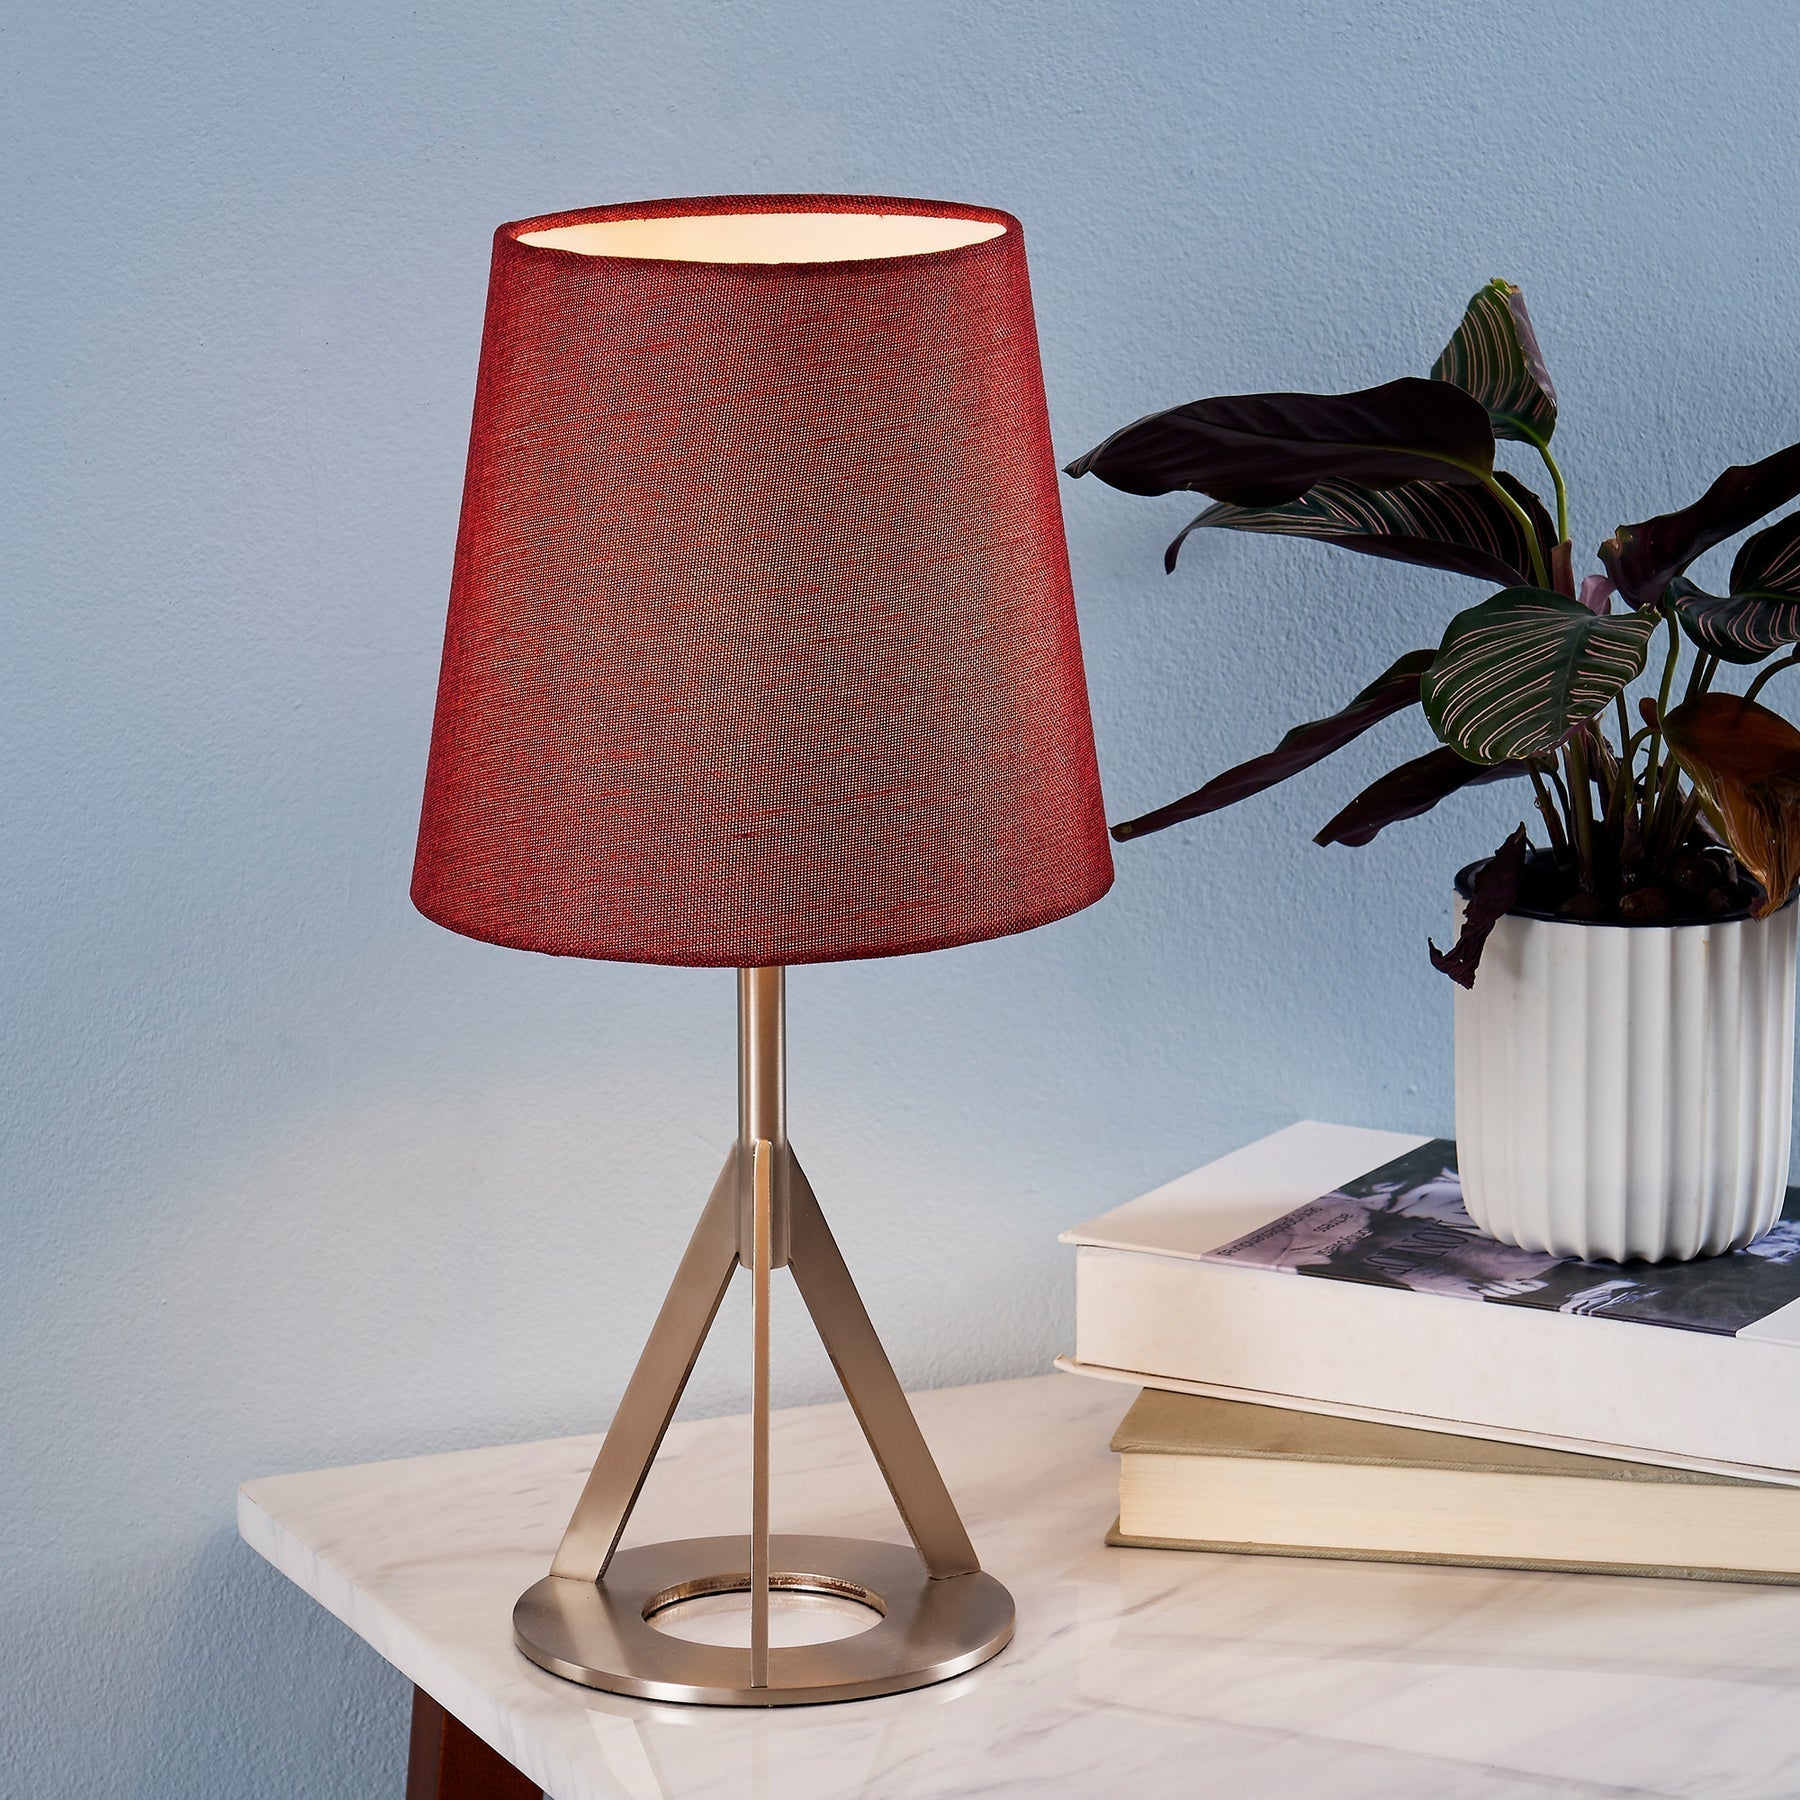 A red table lamp sits on top of a faux marble table.